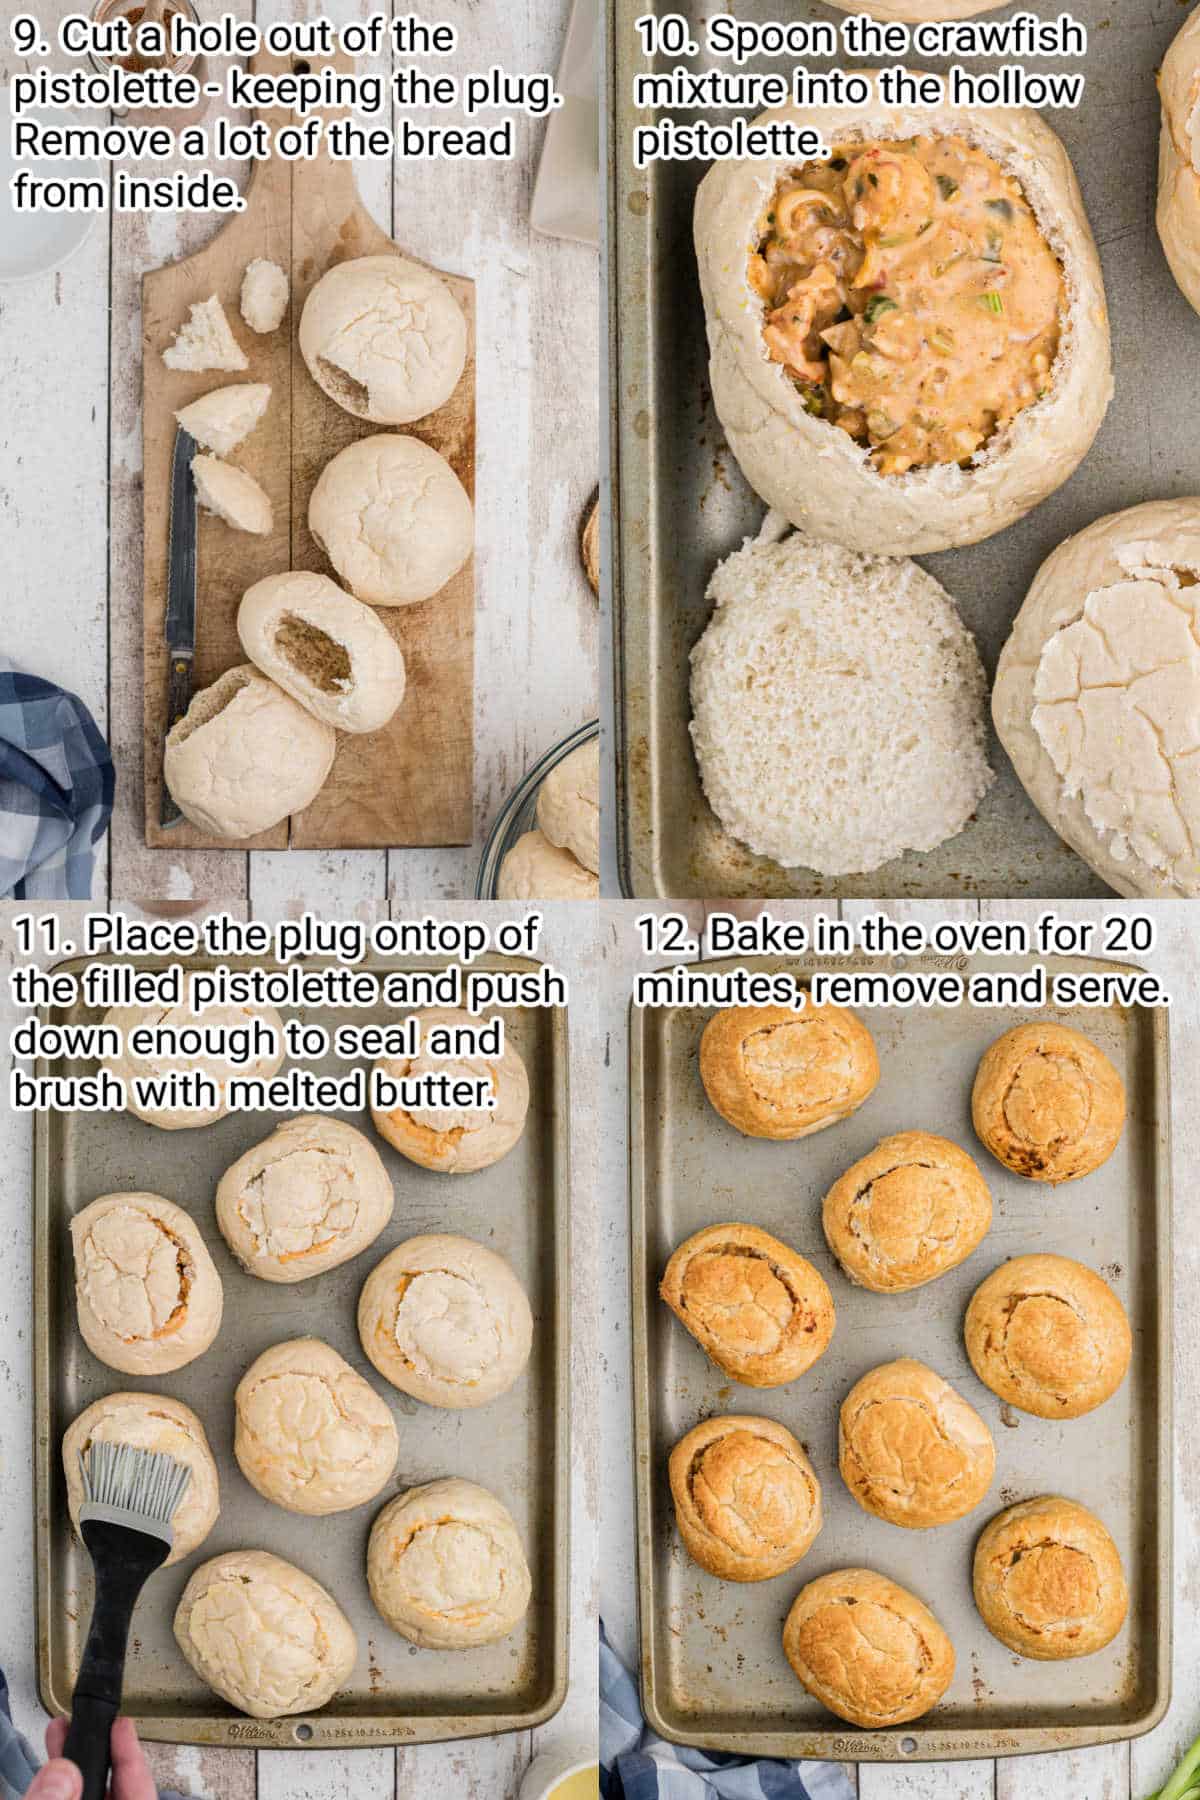 four images showing steps out to make a crawfish stuffed pistolette